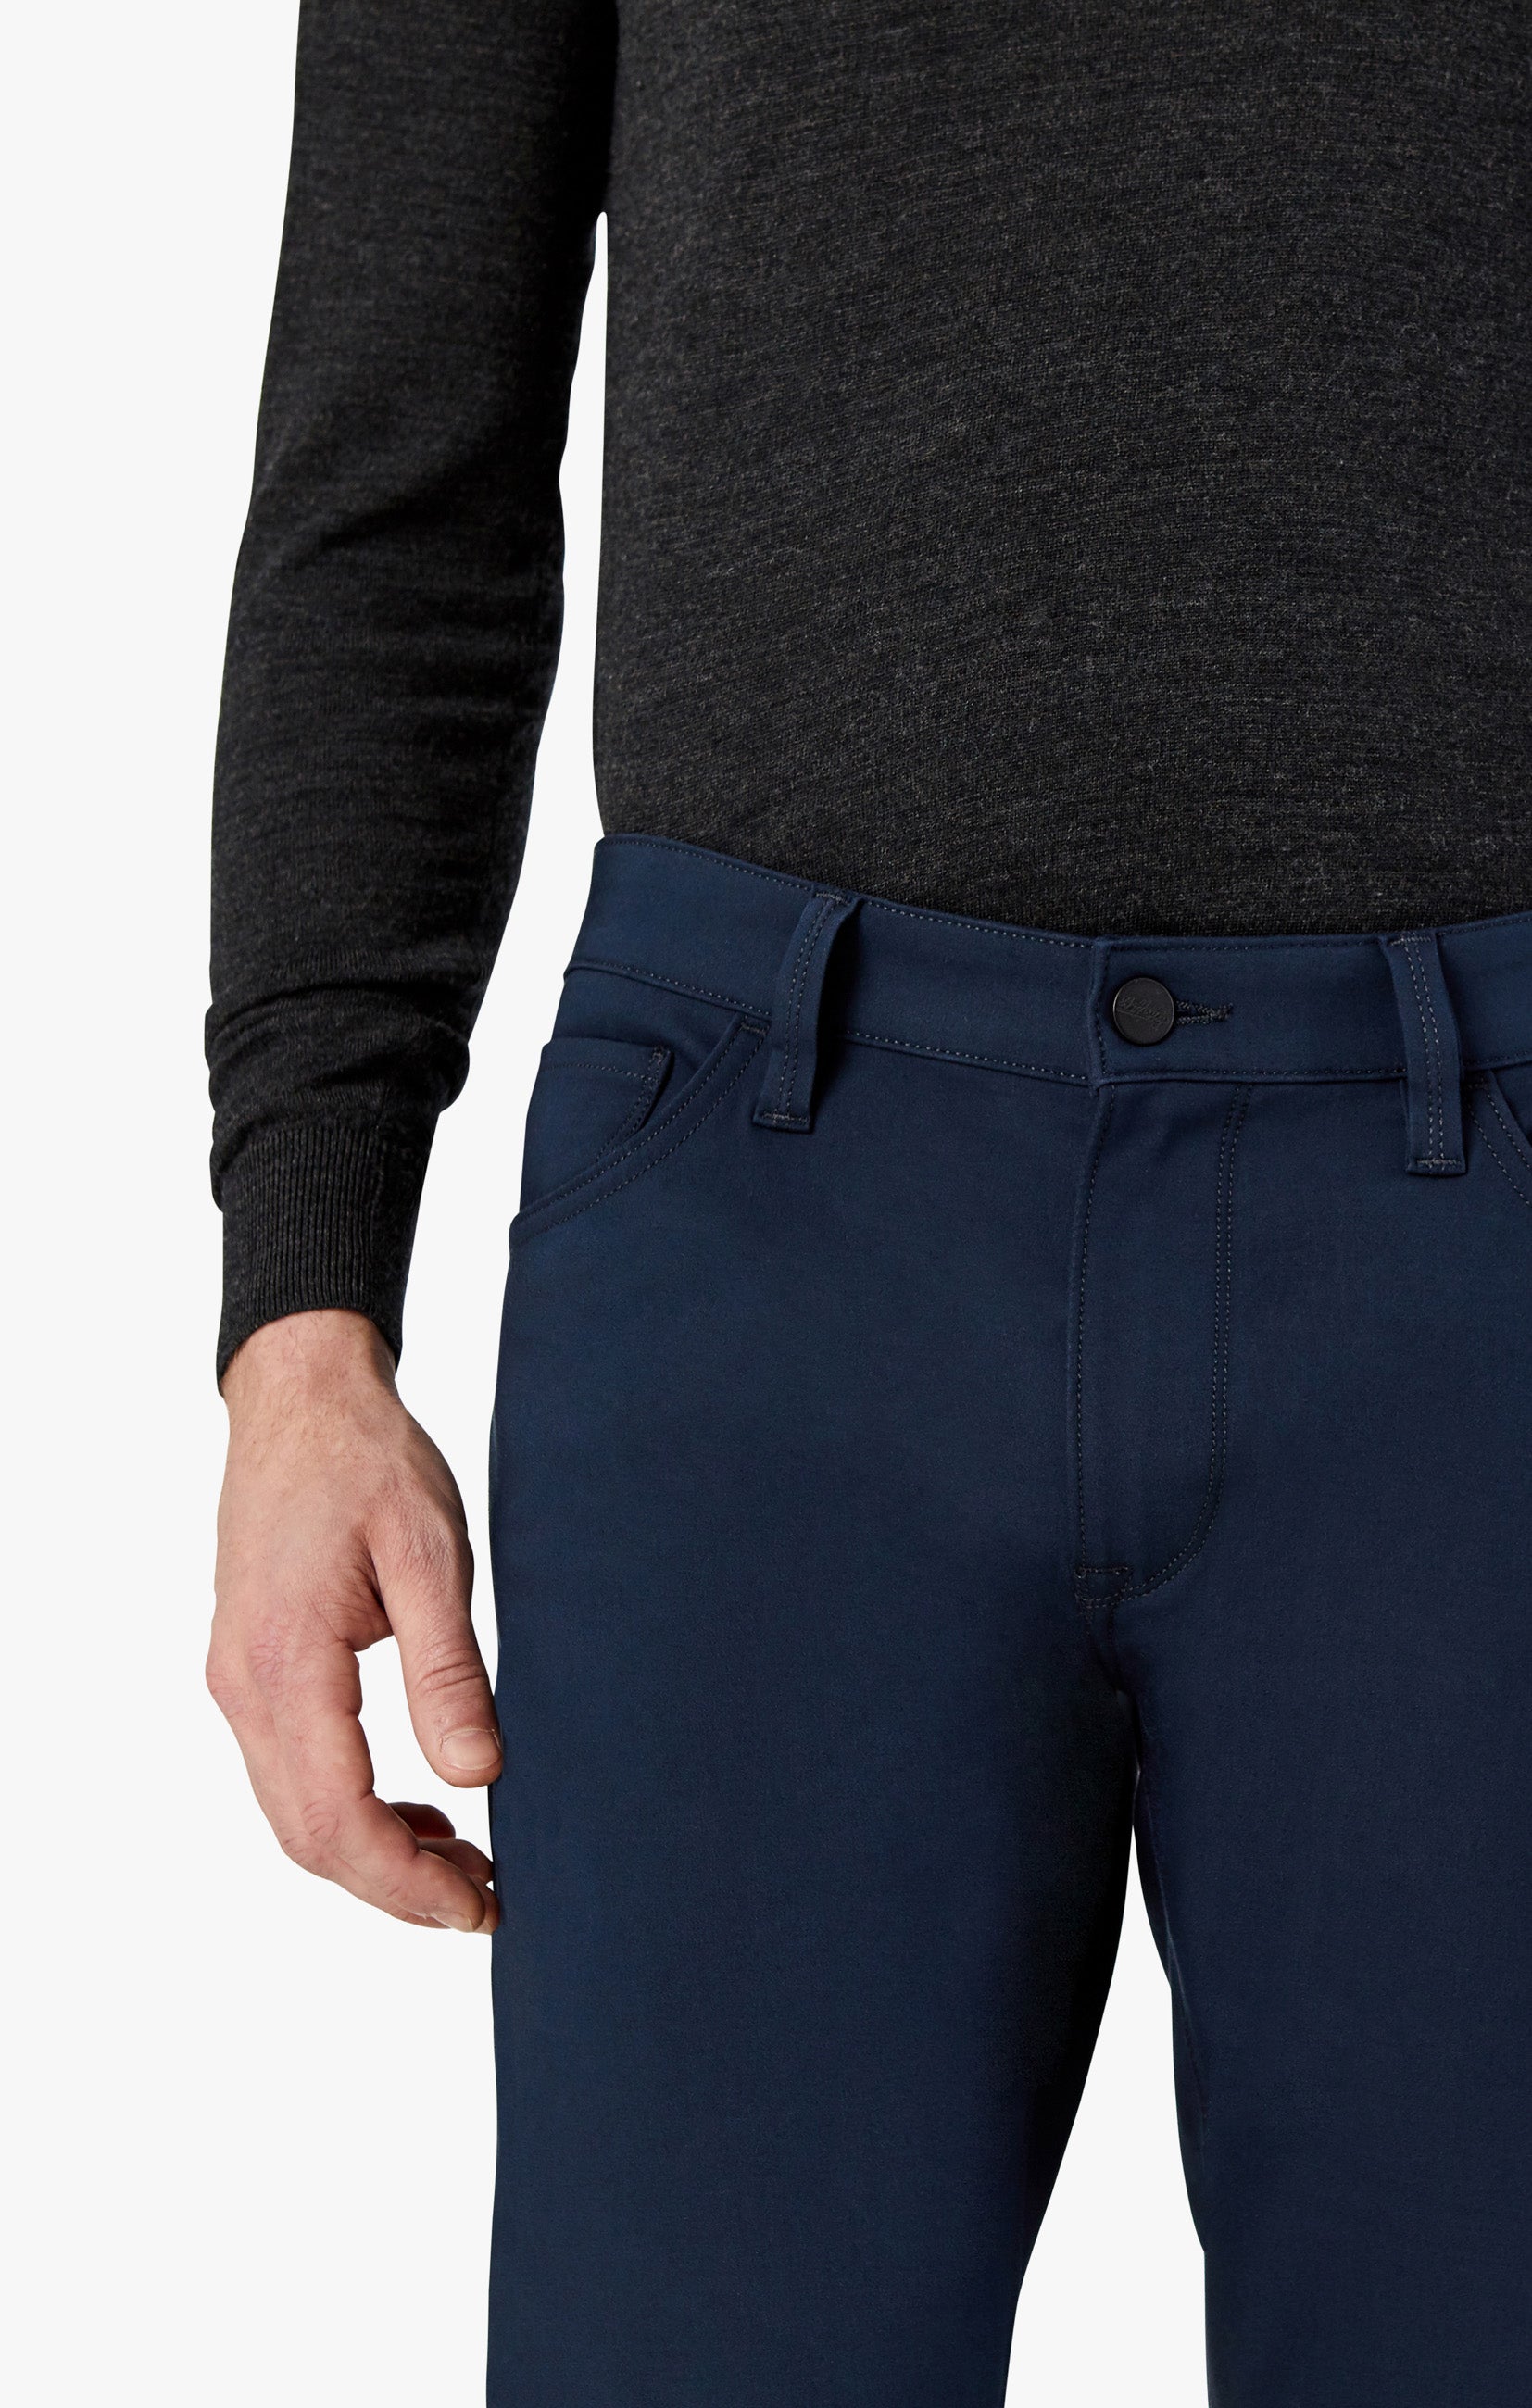 Courage Straight Leg Pants in Navy Commuter Image 5